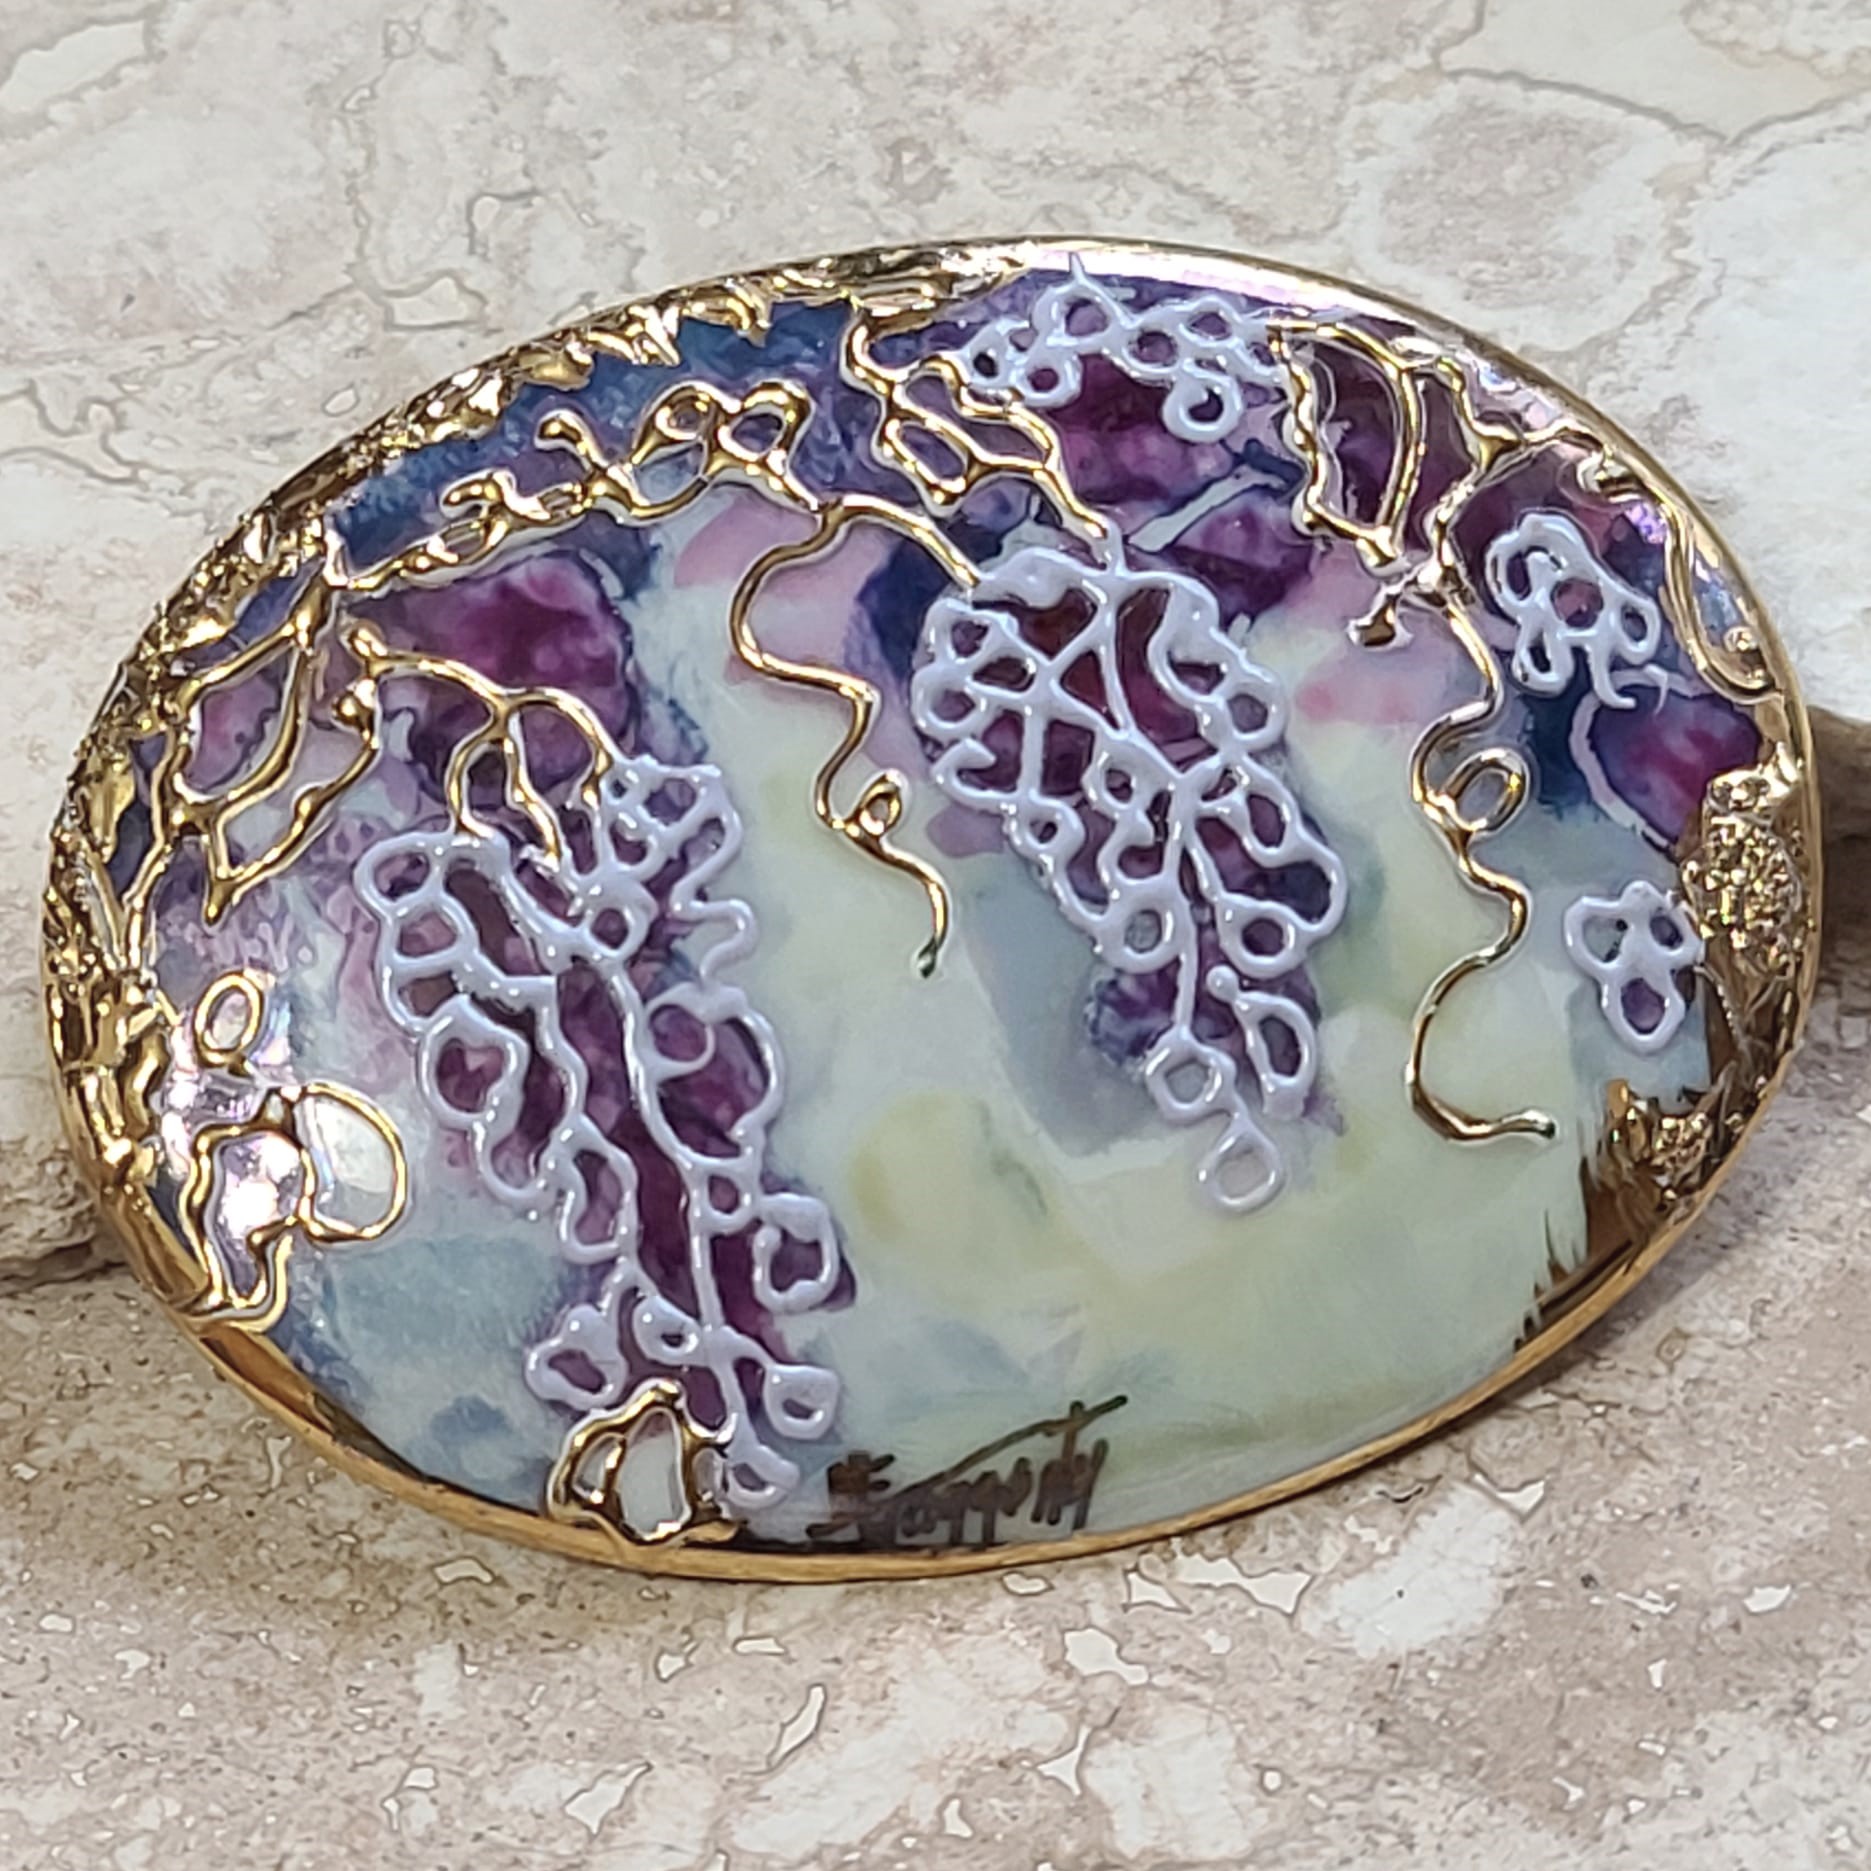 Artsy Brooch Porcelain Handpainted Grapes and brushed gold plate